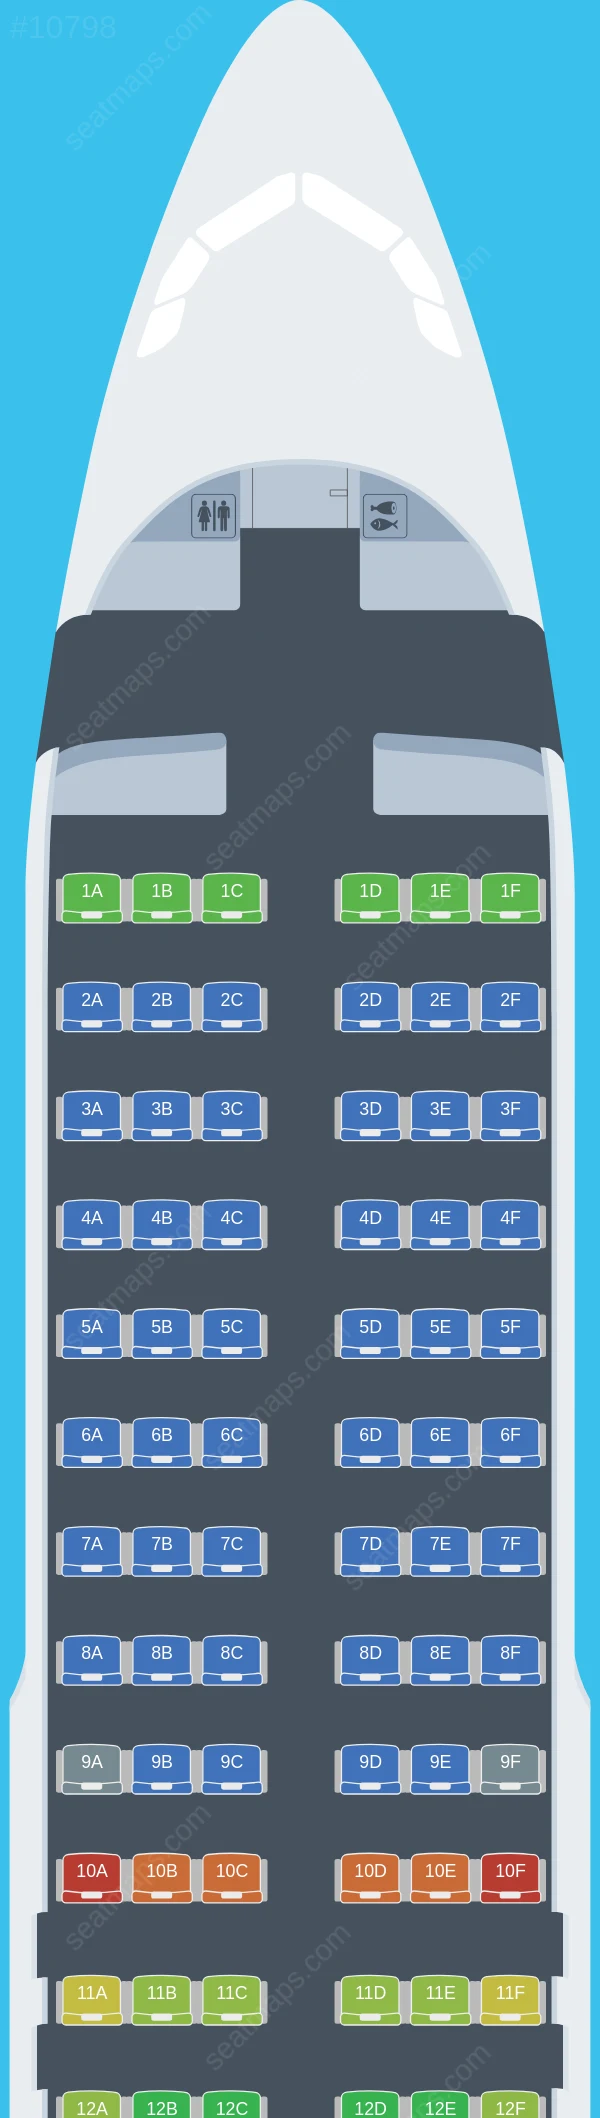 Canada Jetlines Airbus A320-200 seatmap preview